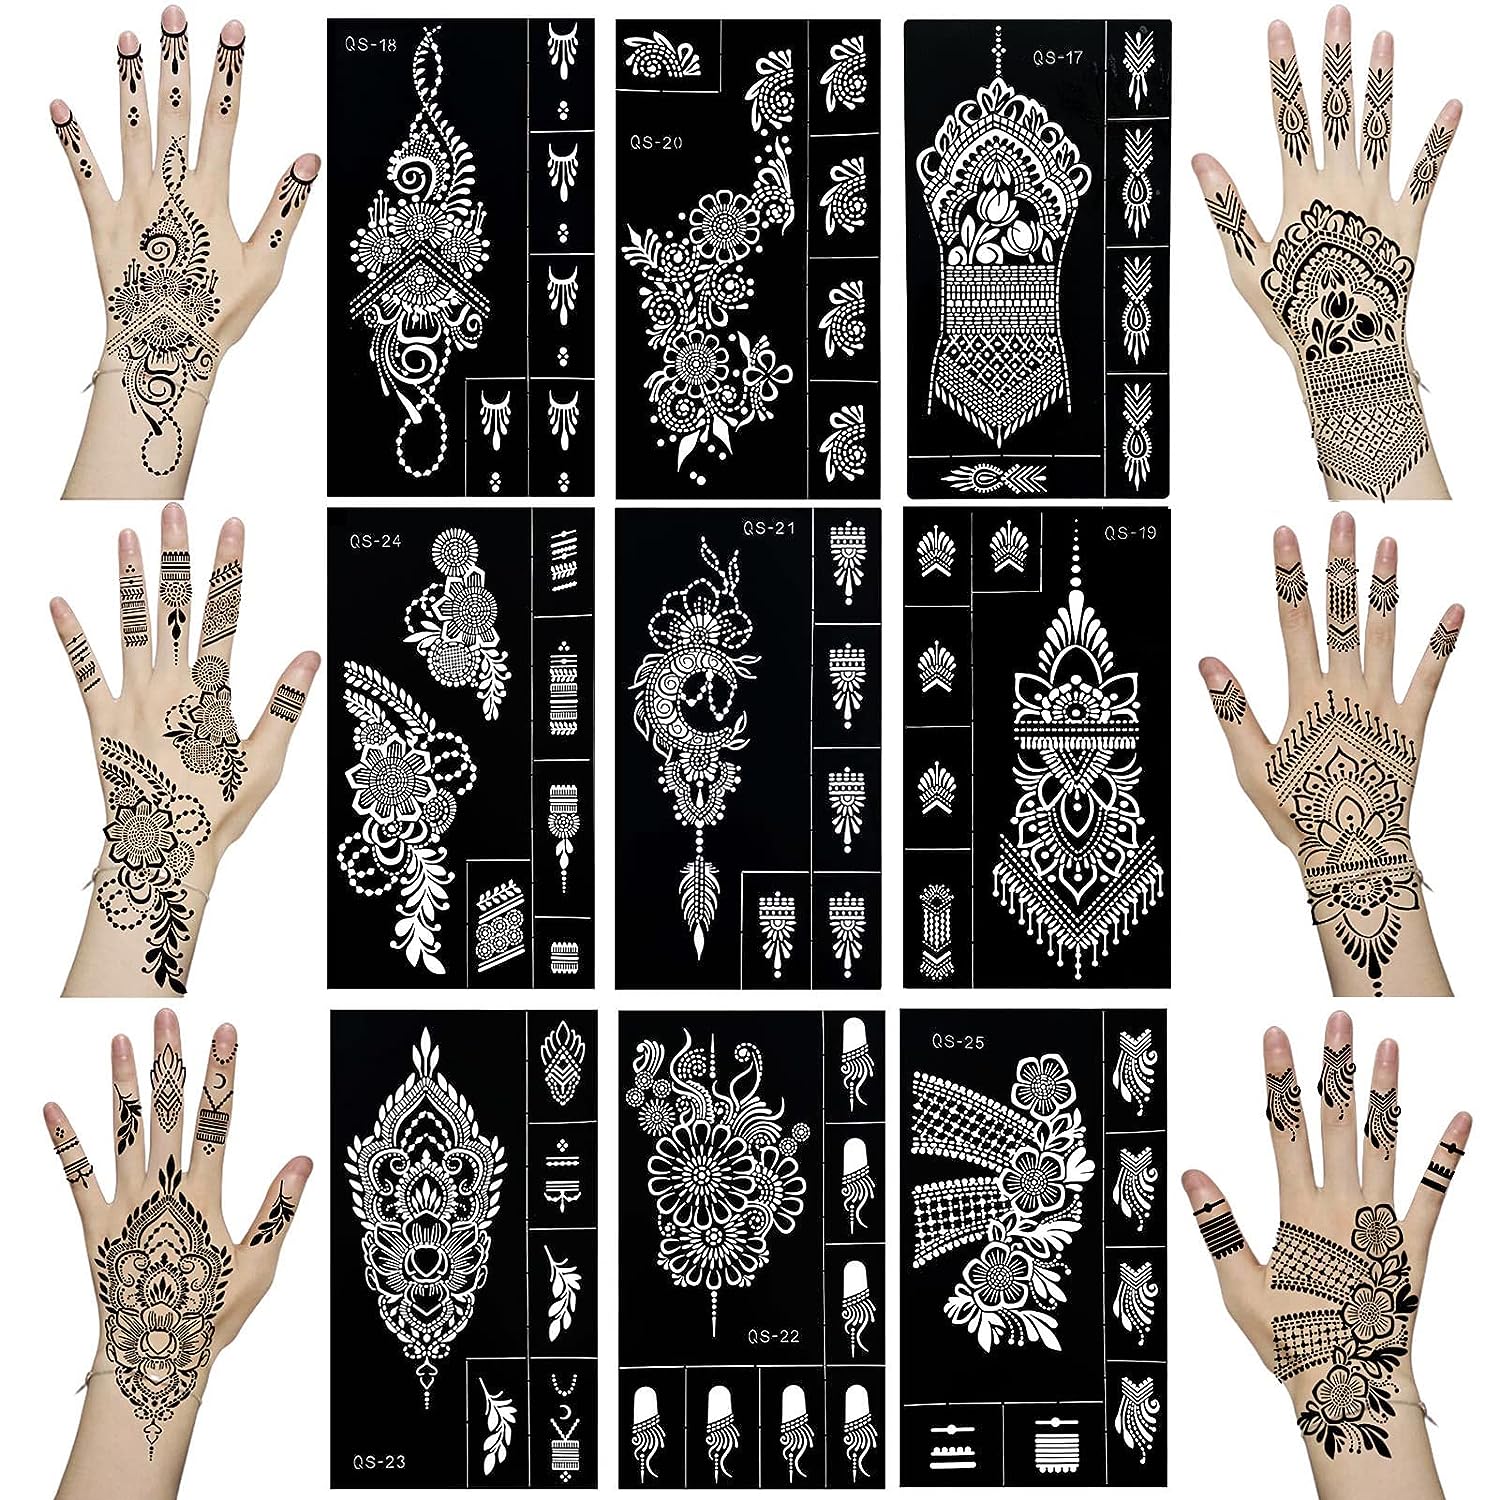 Mzstgh Henna Tattoo Stencils kit,Temporary Tattoos Stencils Reusable Henna  Tattoo kit for Hand Forearm Airbrush Tattooing Template, Indian Temporary